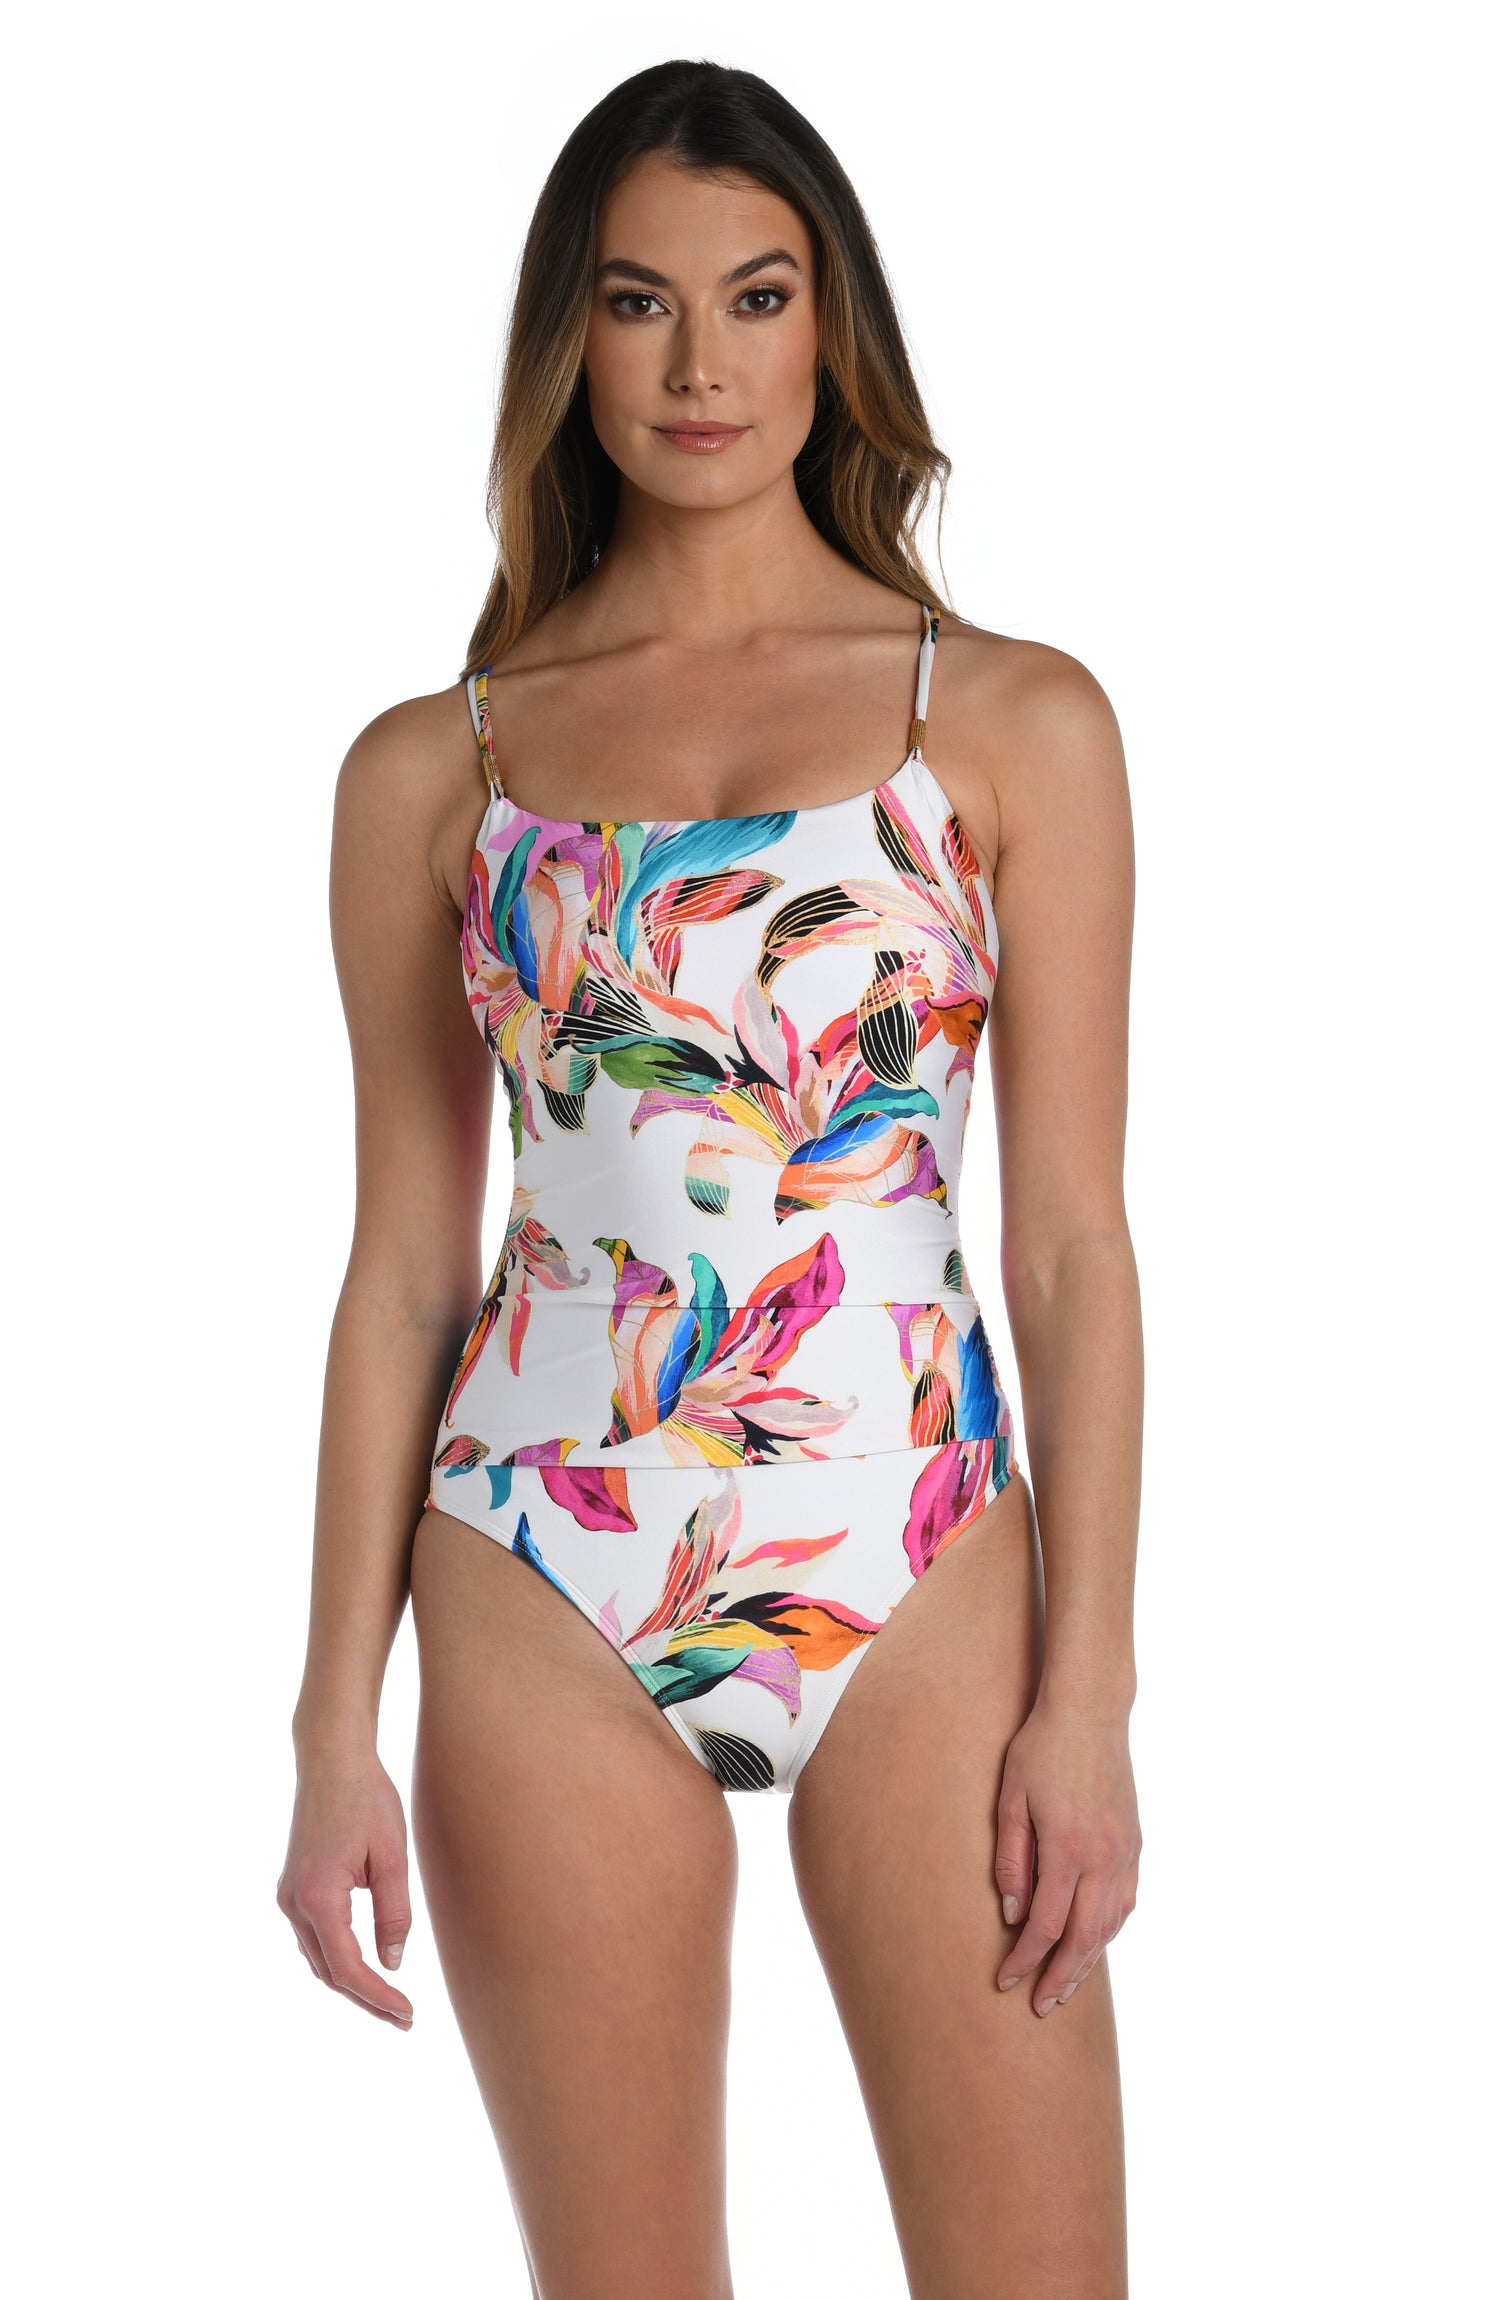 Model is wearing a multi colored tropical printed lingerie one piece from our Paradise City collection!